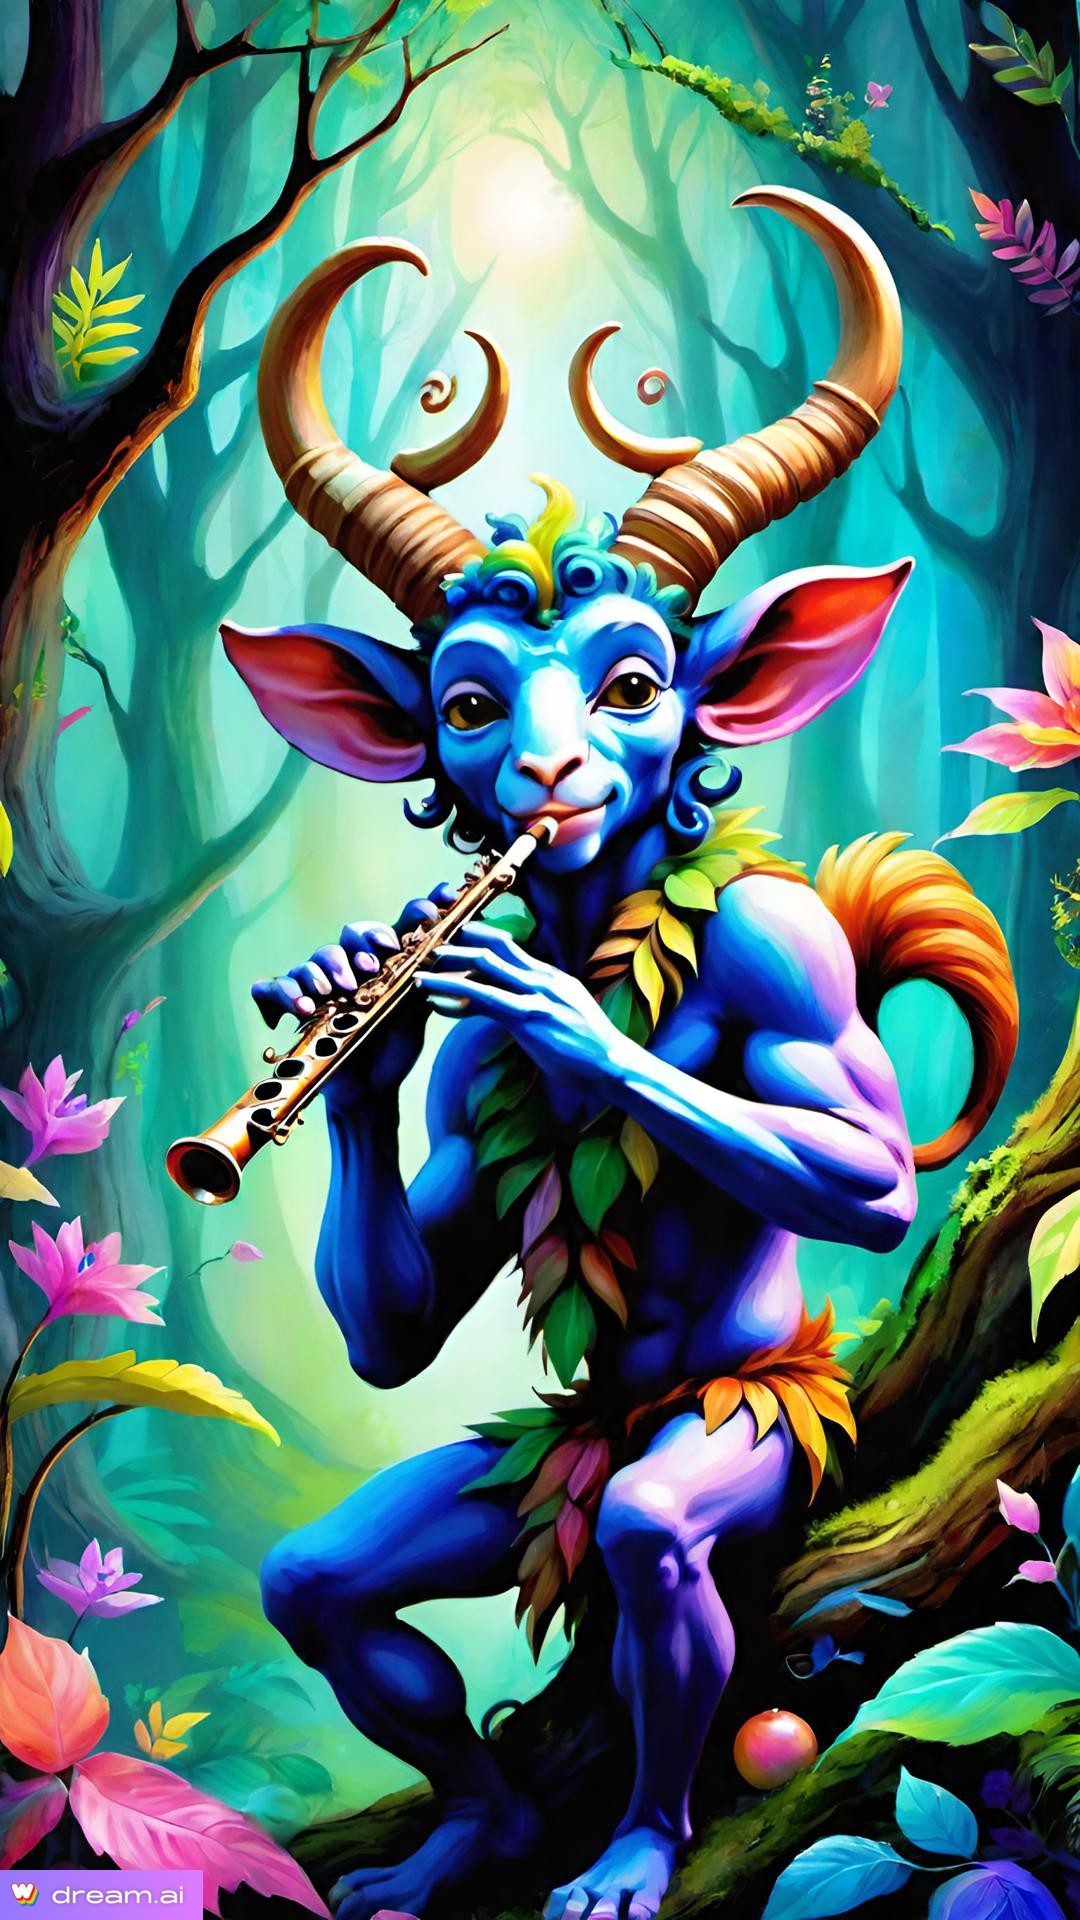 a cartoon of a blue creature playing a flute in a forest